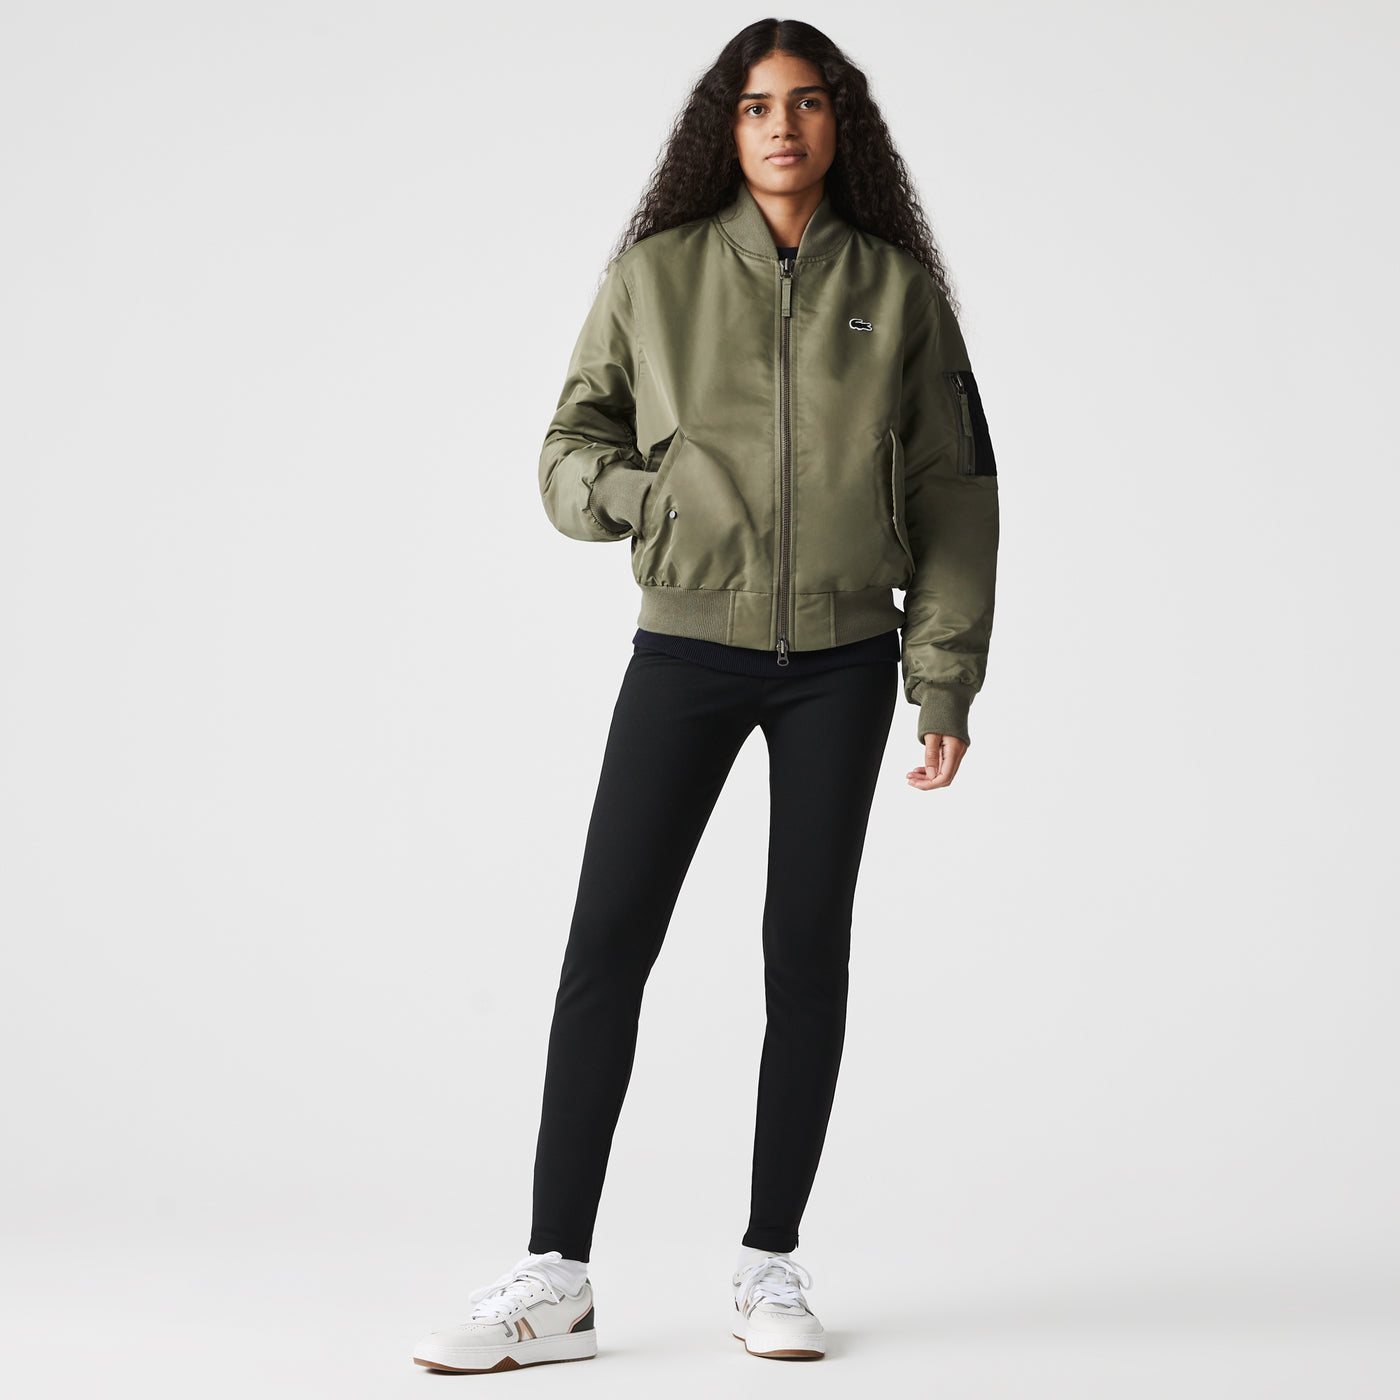 Shop The Latest Collection Of Outlet - Lacoste Unisex Live Oversized Contrast Bomber Jacket - Bh1158 In Lebanon